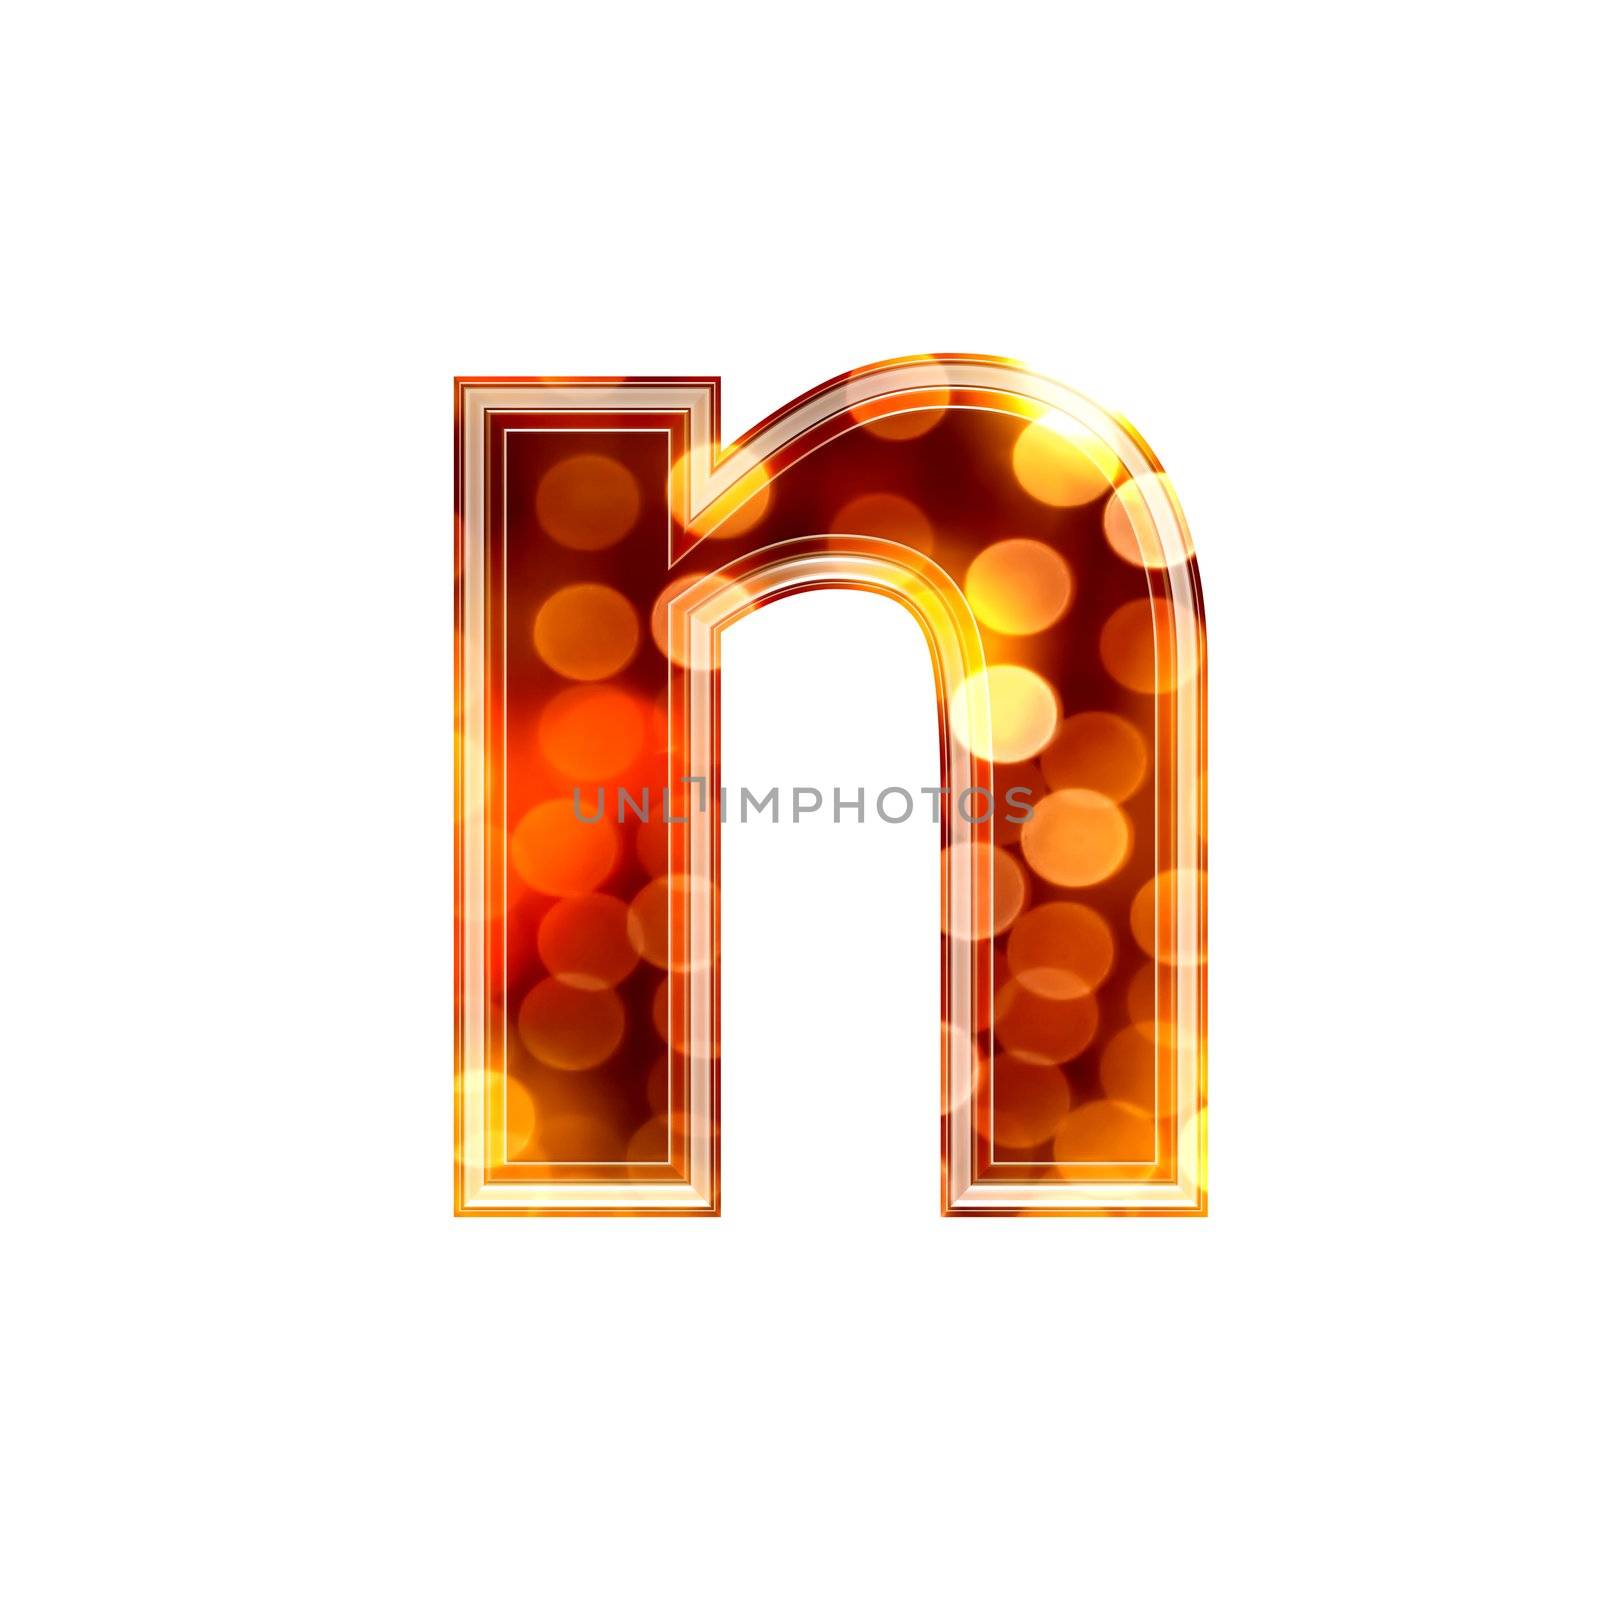 3d letter with glowing lights texture - n